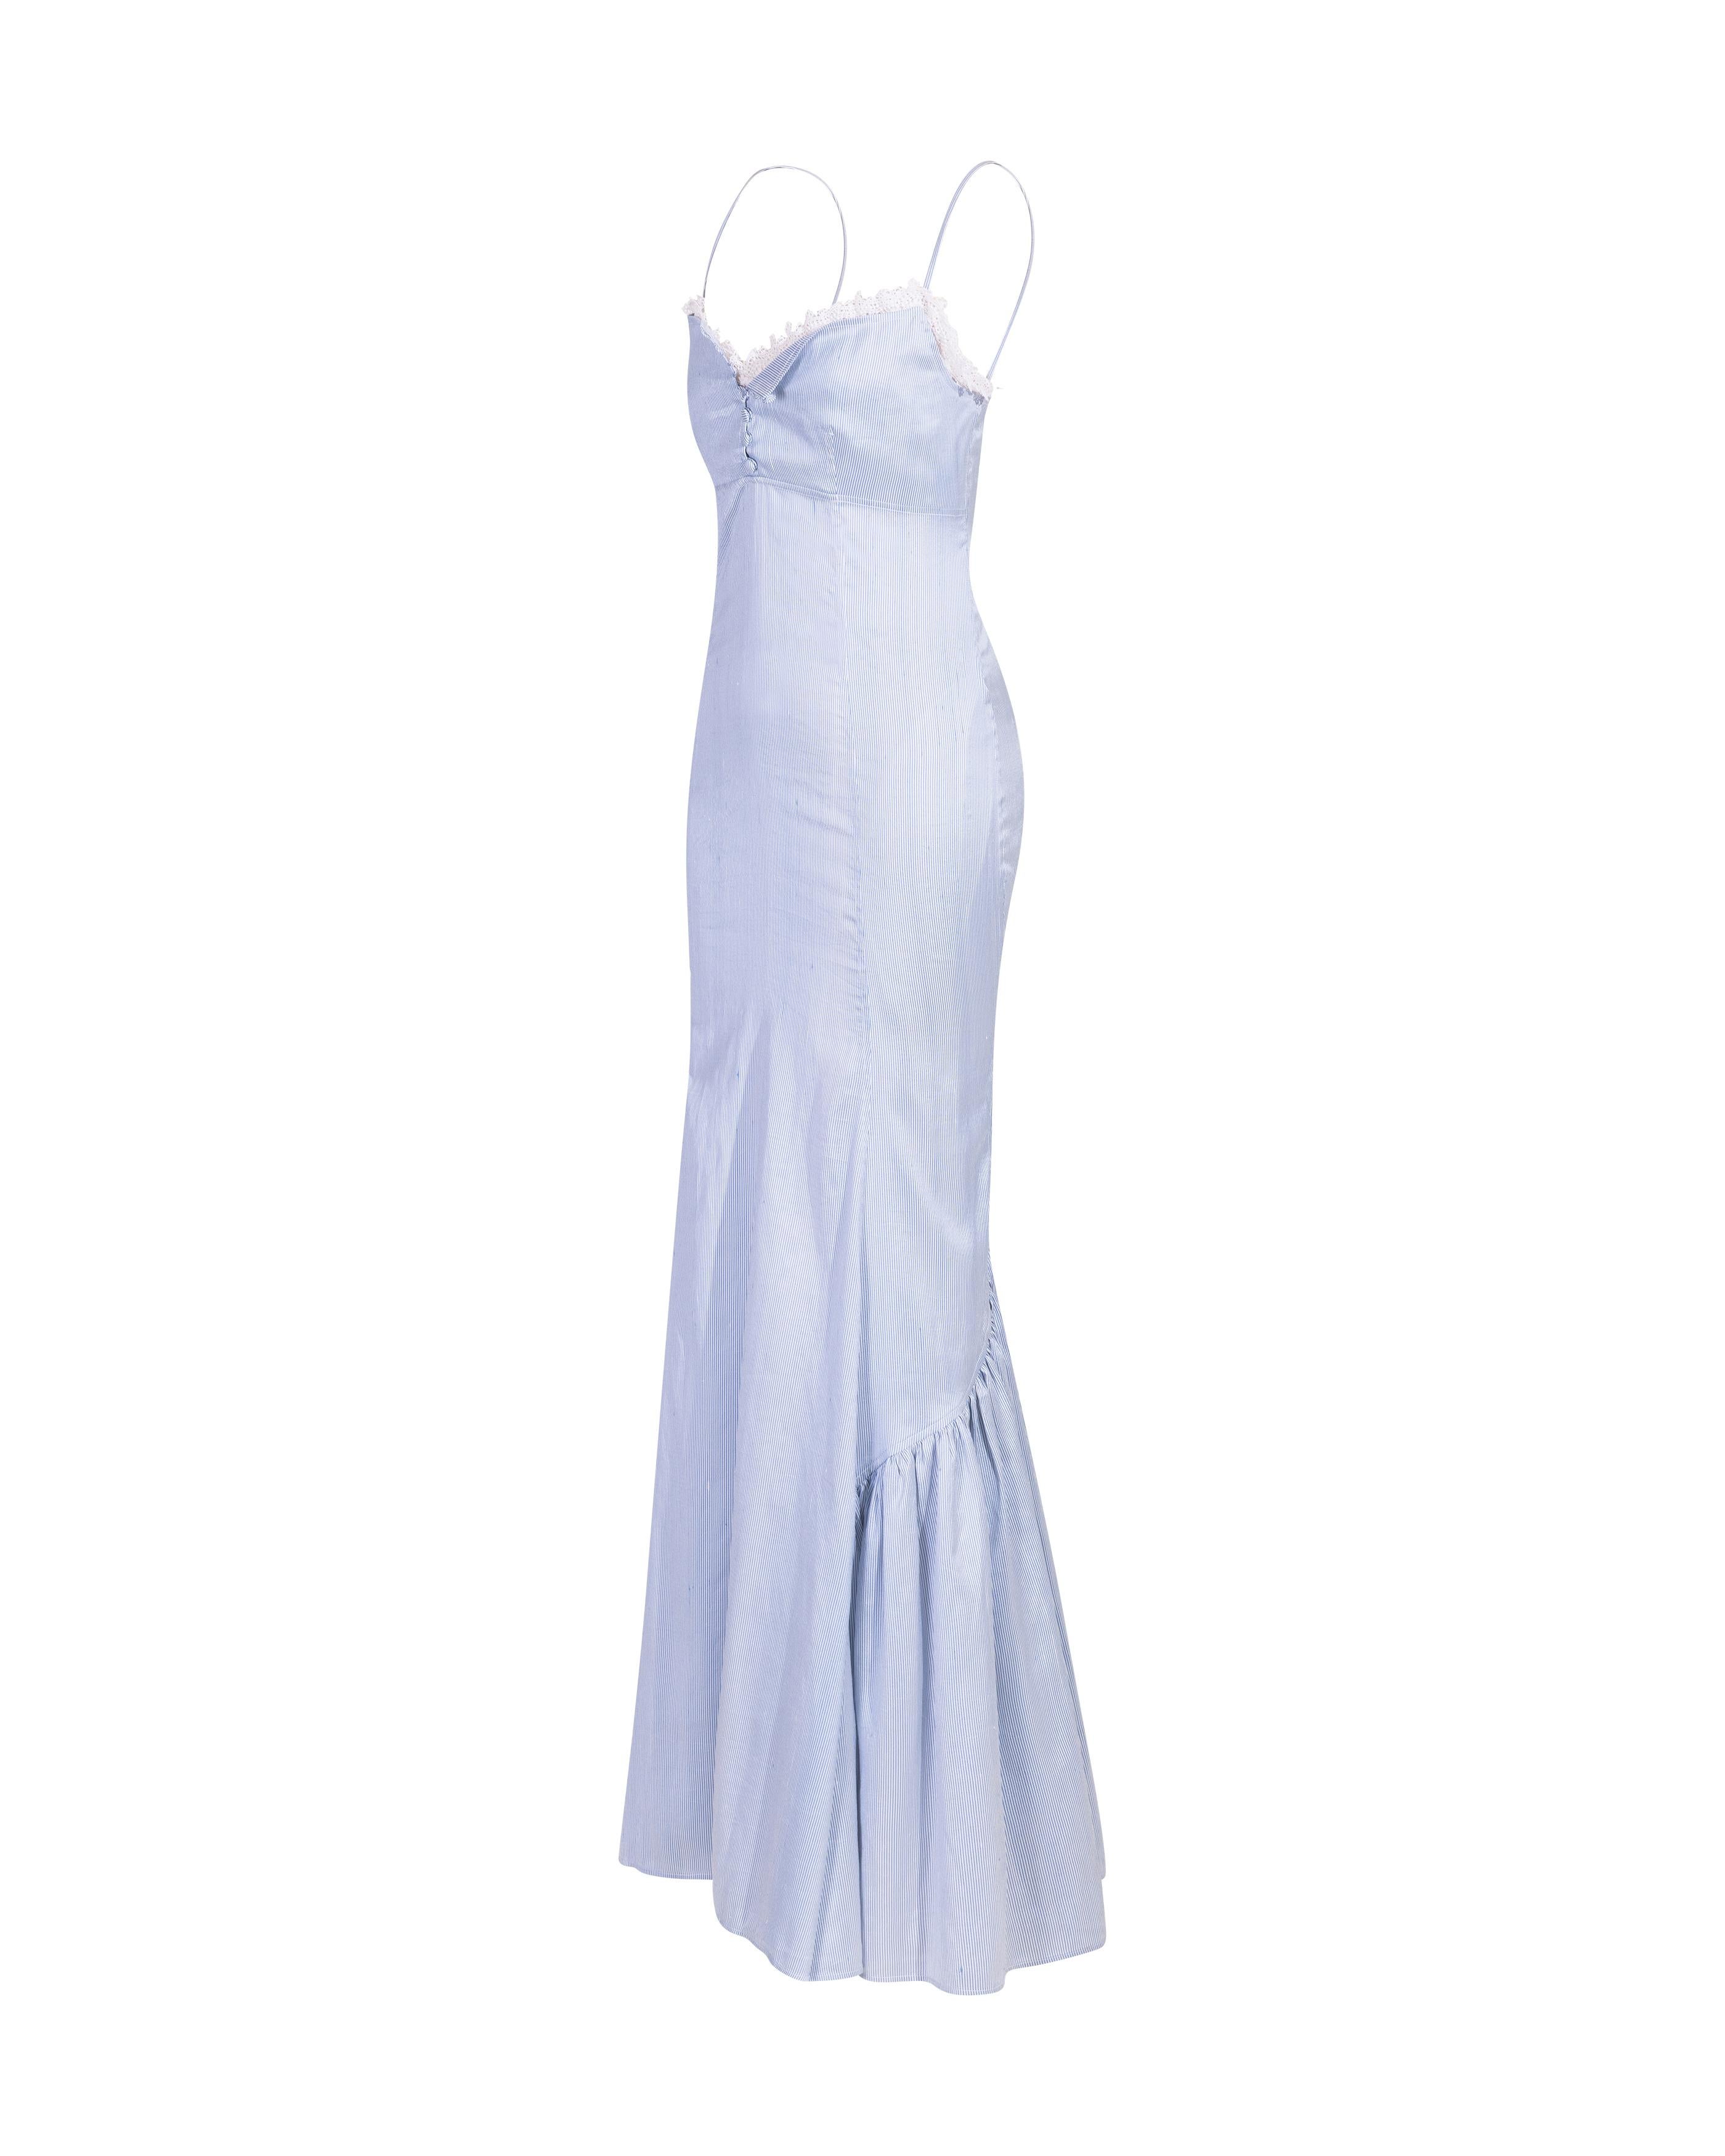 S/S 2006 Ralph Lauren Pinstriped Blue and White Lace Trim Gown In New Condition In North Hollywood, CA